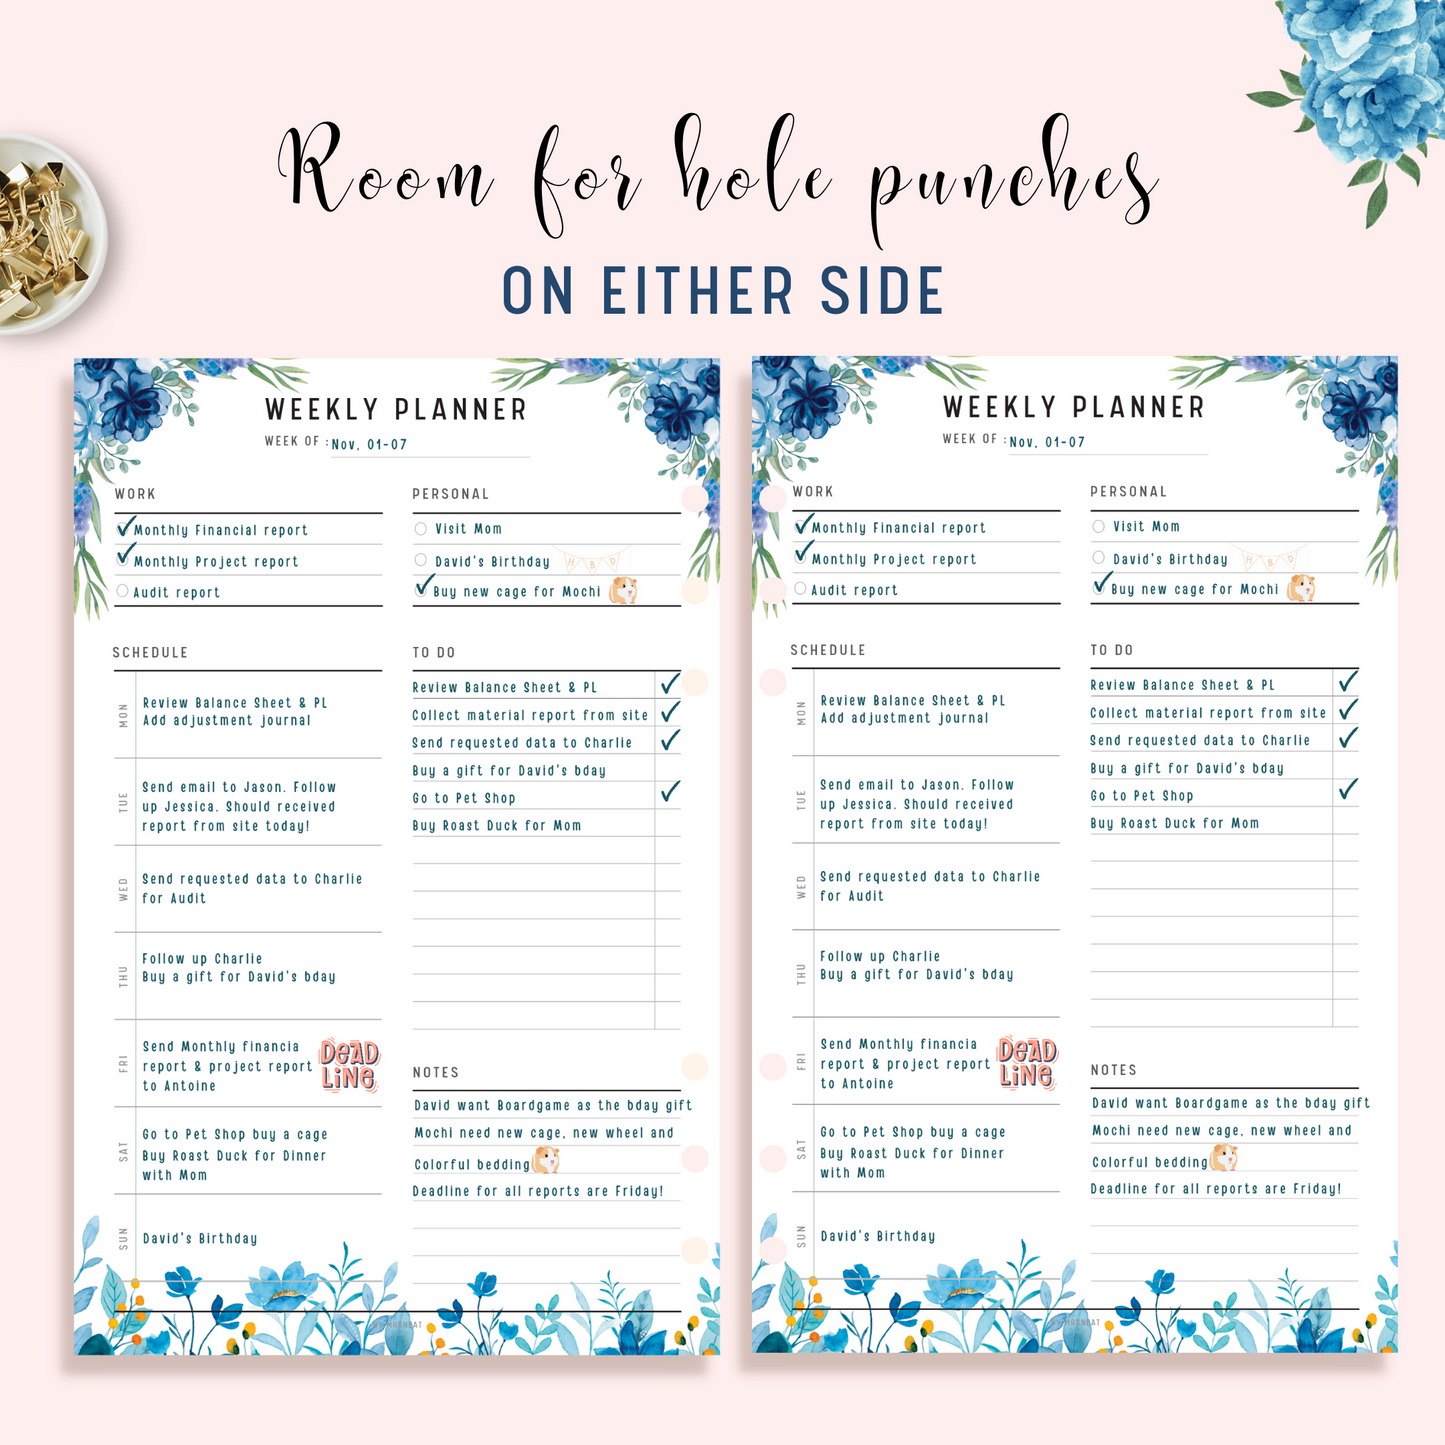 Blue Floral Weekly Planner Printable with room for hole punches on either size